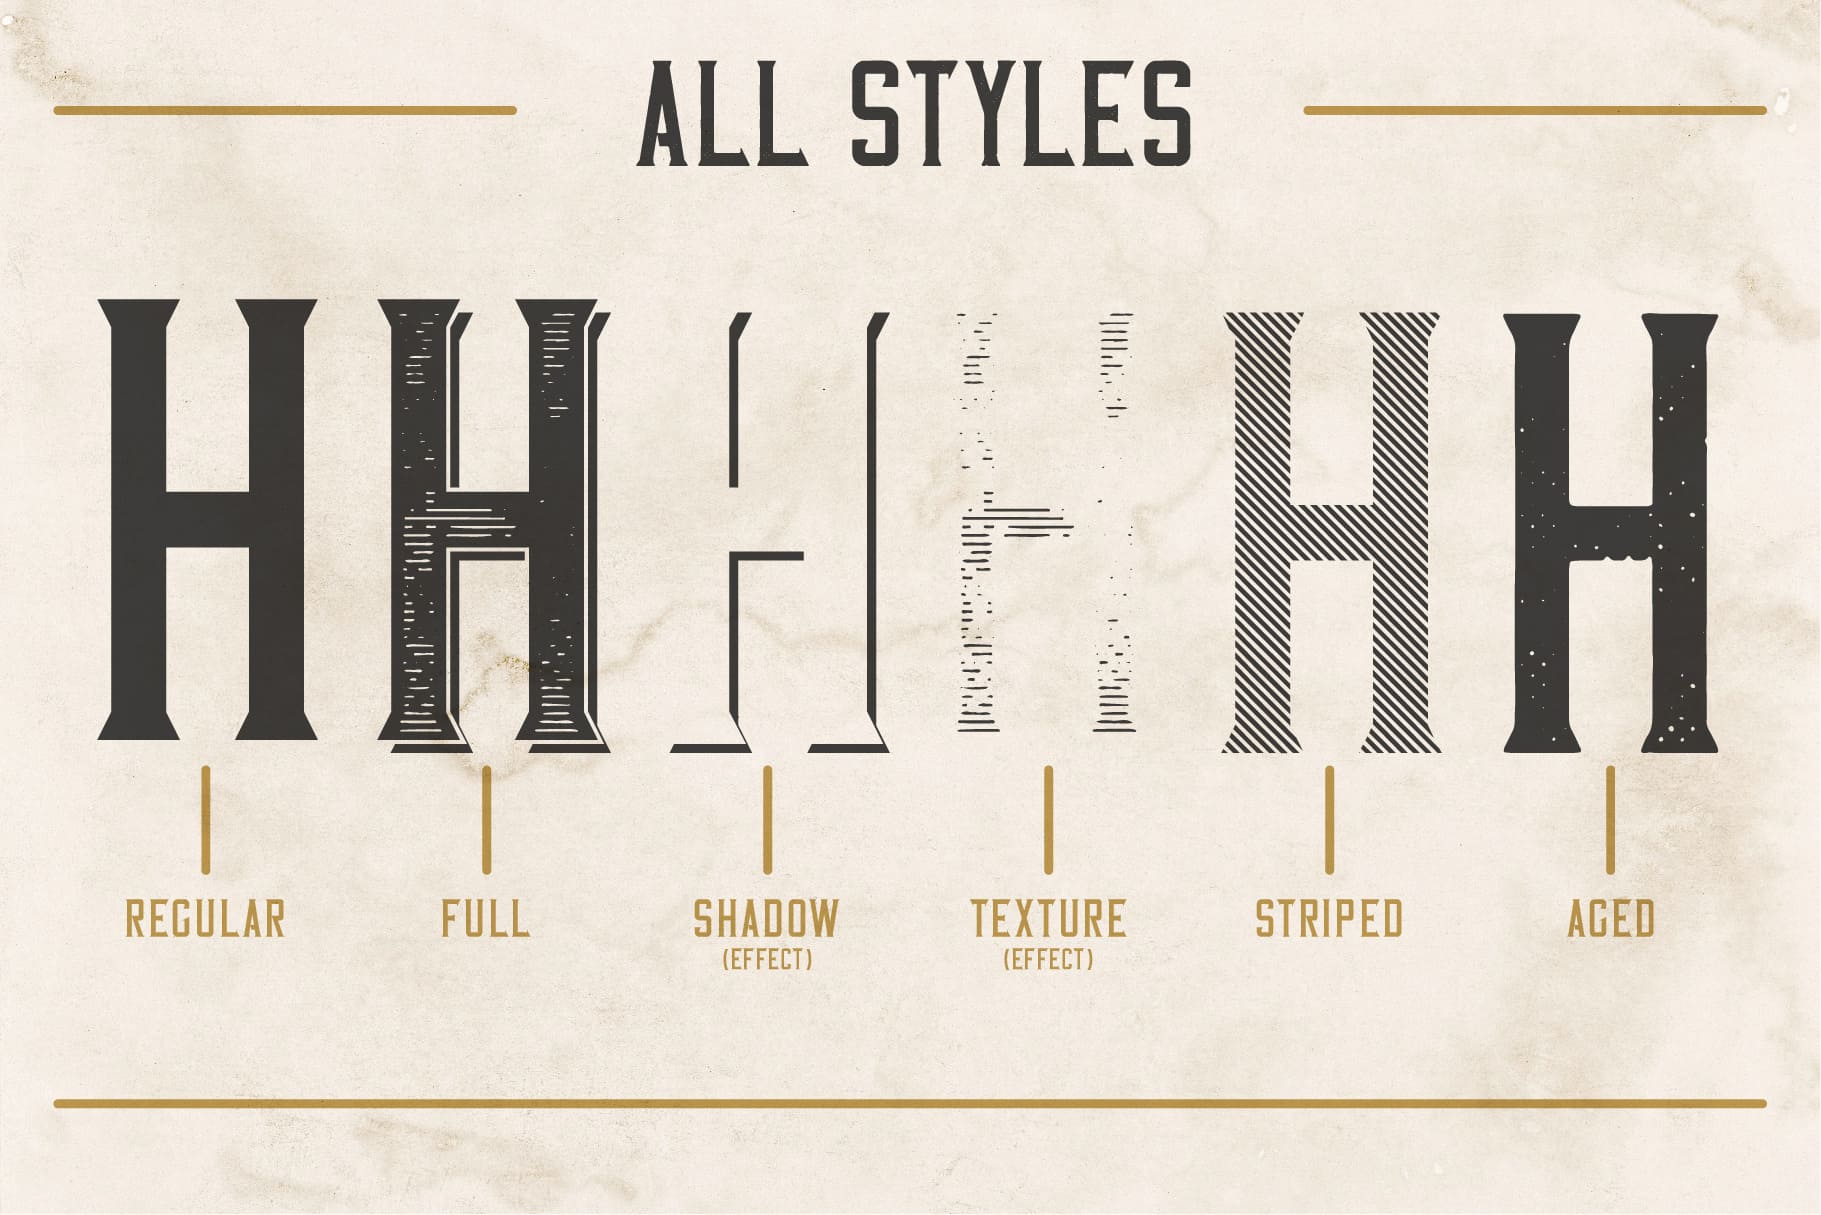 All styles of Vintage Whiskey Typeface.